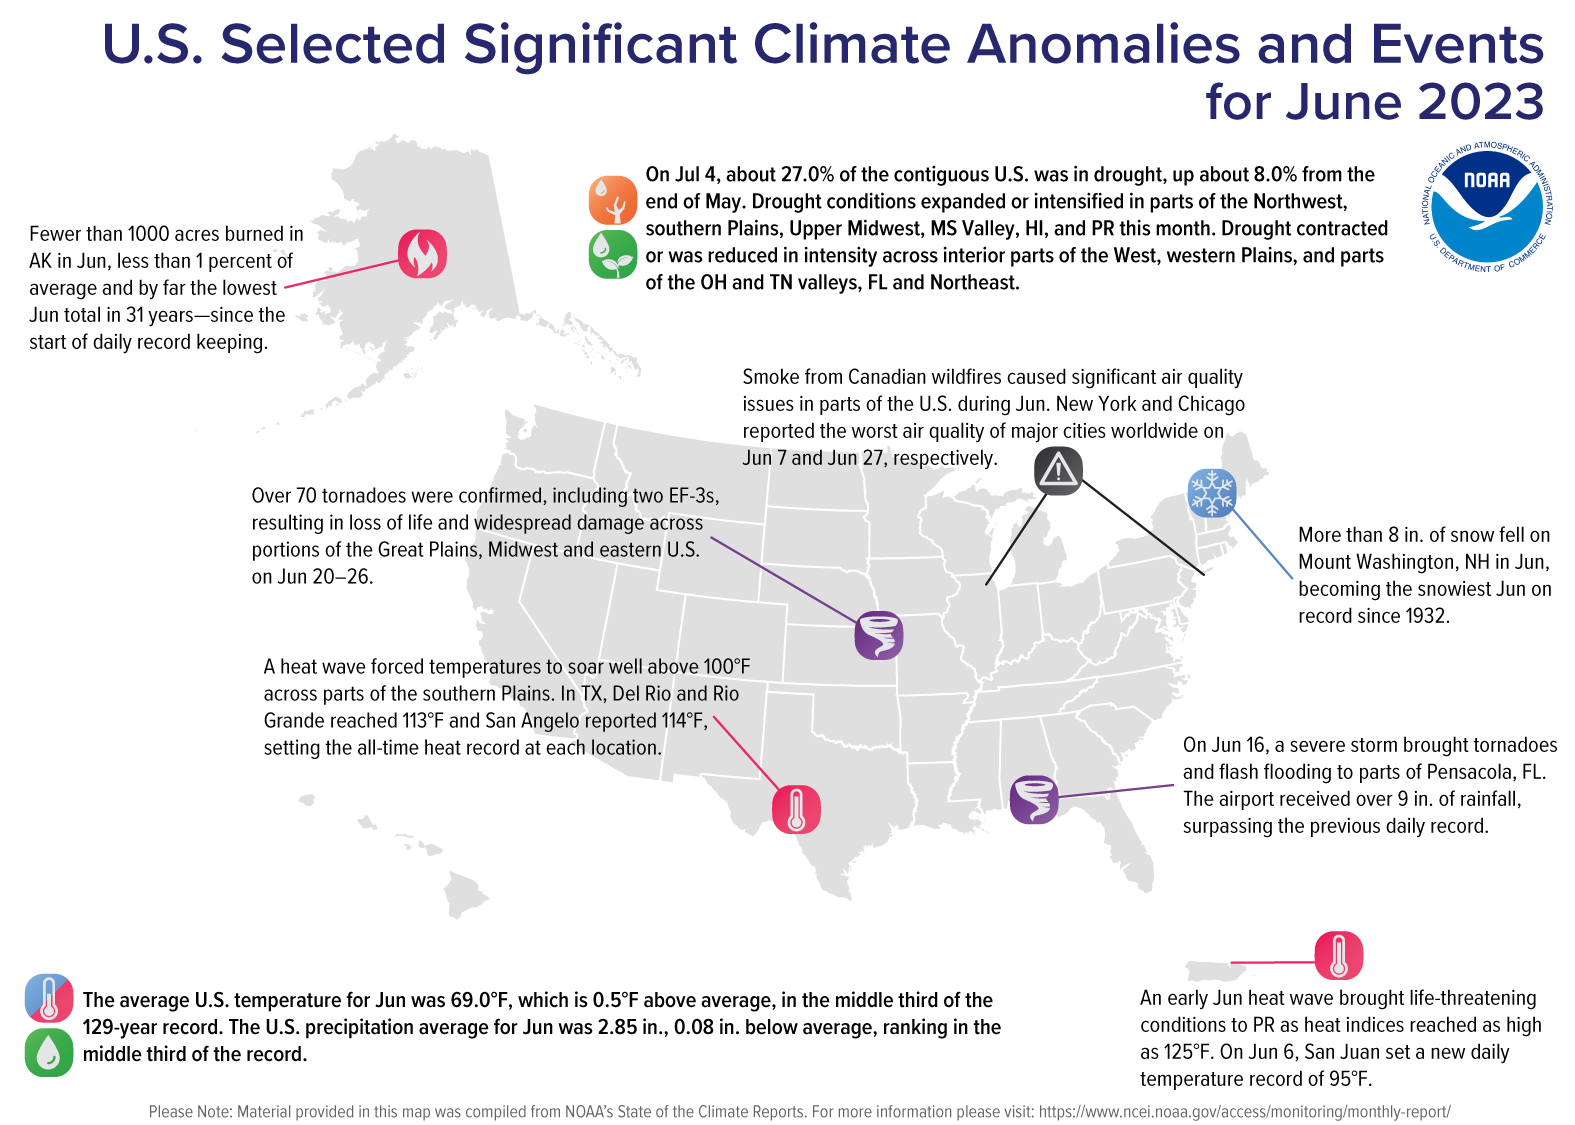 A map of the U.S. plotted with significant climate events that occurred during June 2023. Please see the story below as well as the full climate report highlights at http://bit.ly/USClimate202306.